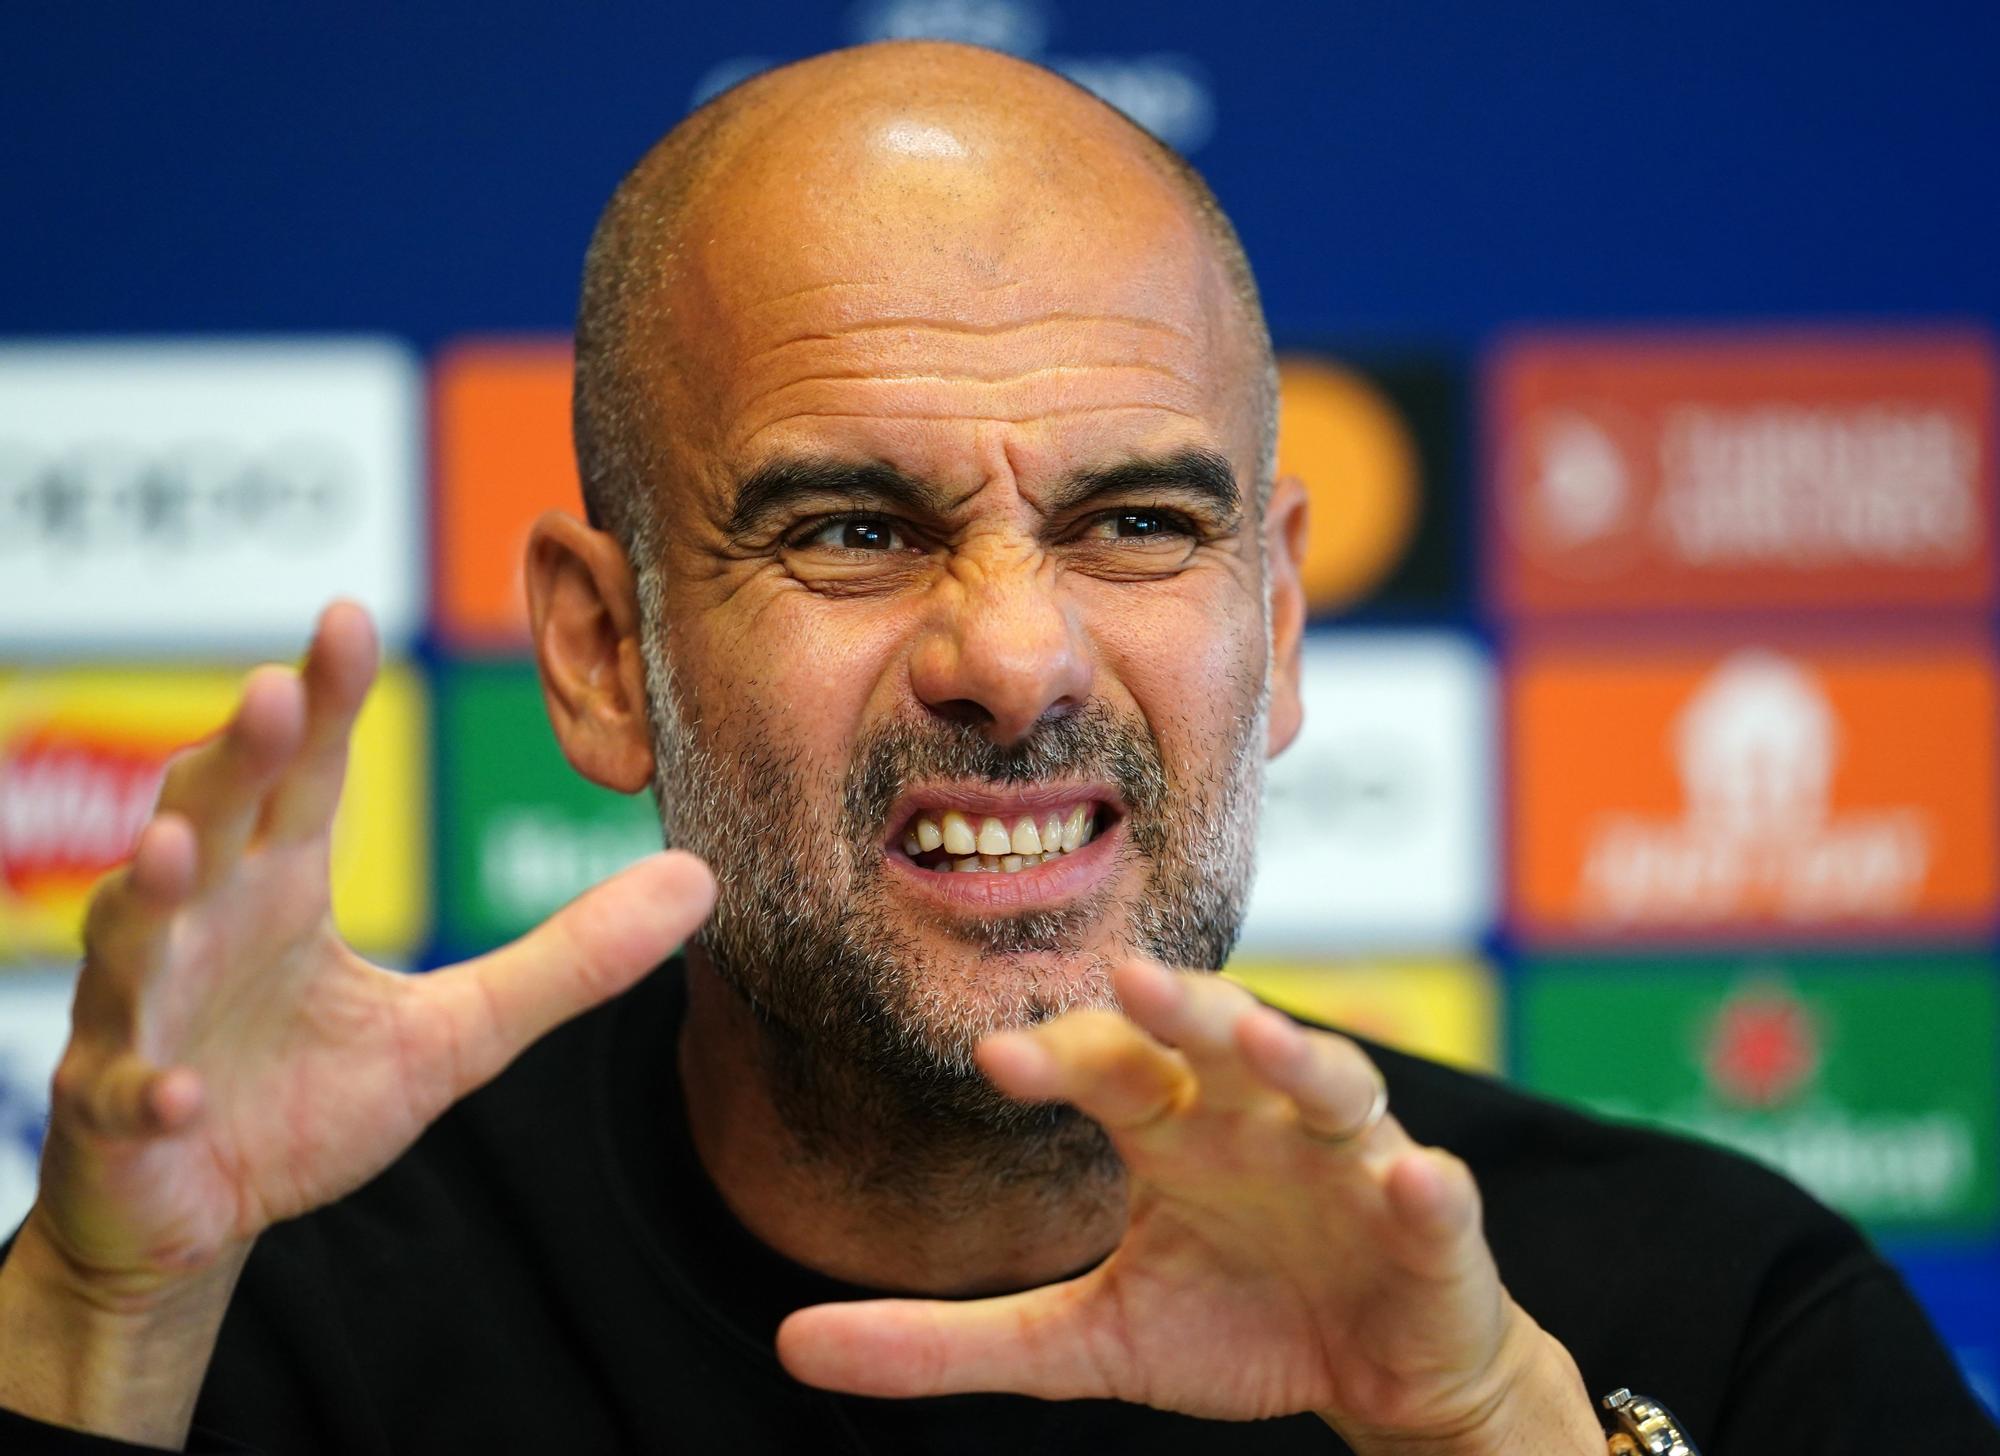 04 October 2022, United Kingdom, Manchester: Manchester City manager Pep Guardiola speaks during a press conference at the City Football Academy  ahead of Wednesday's UEFA Champions League Group G soccer match against FC Copenhagen Photo: Martin Rickett/P